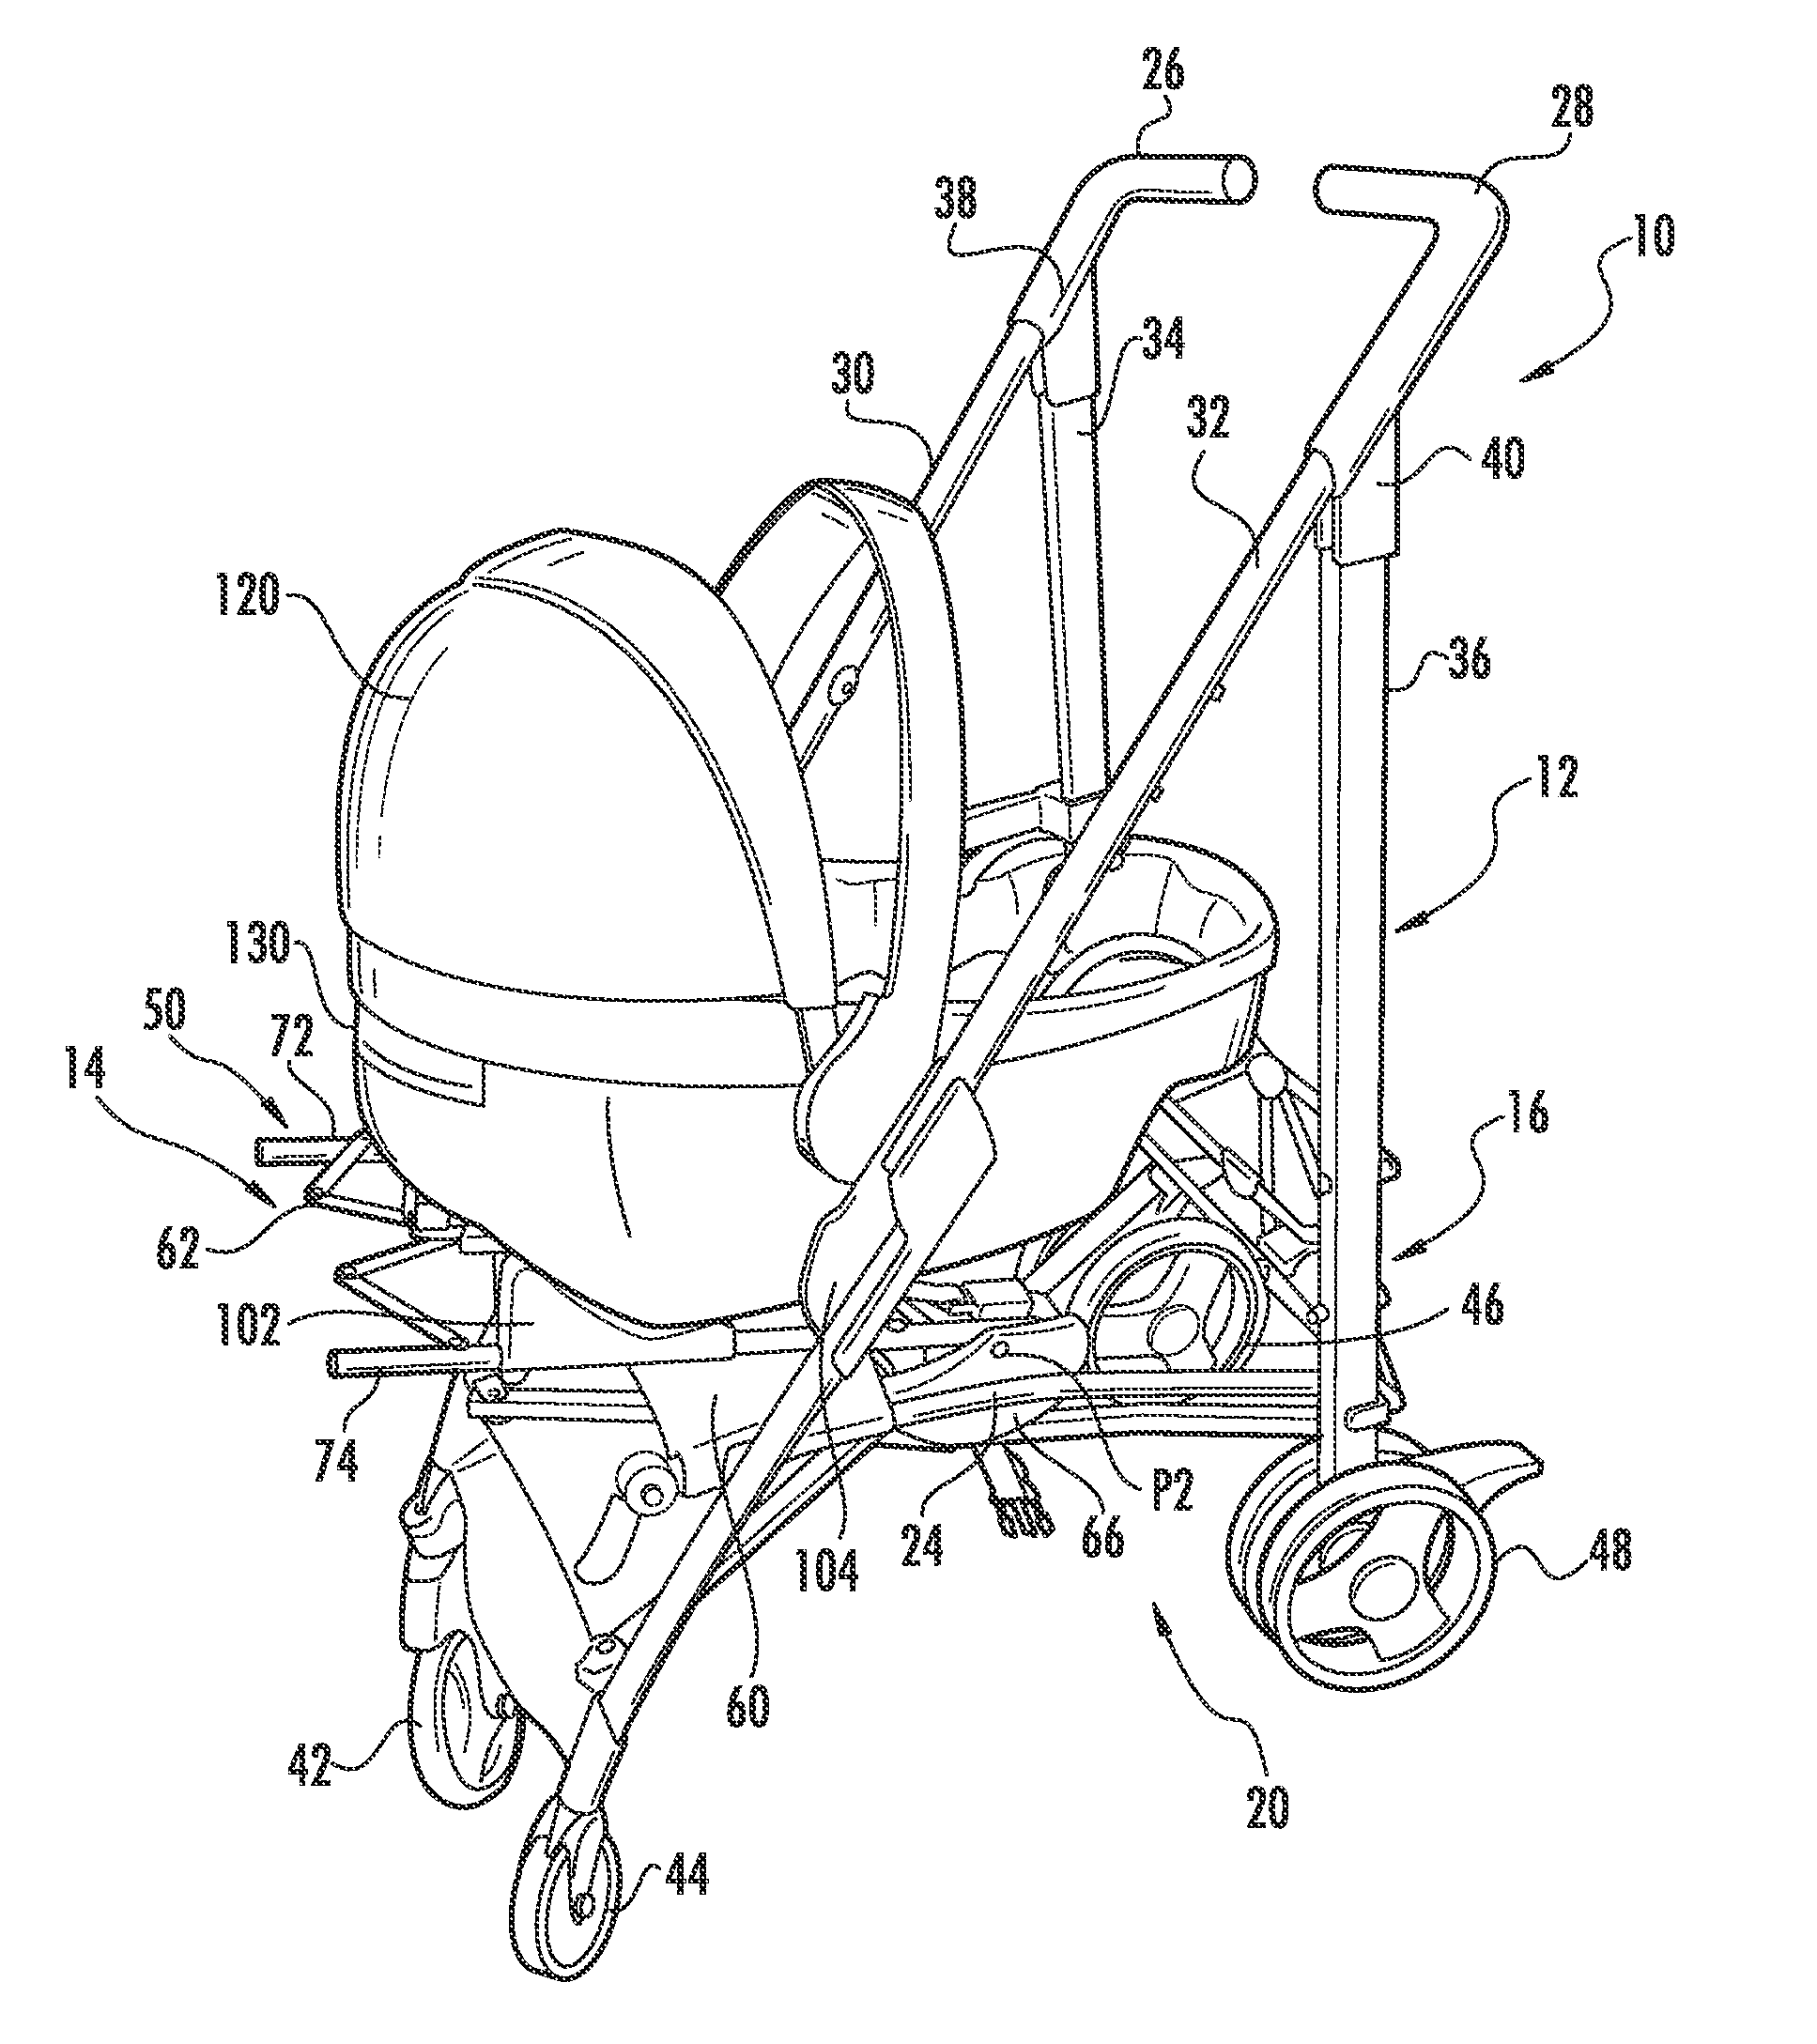 Stroller with travel seat attachment